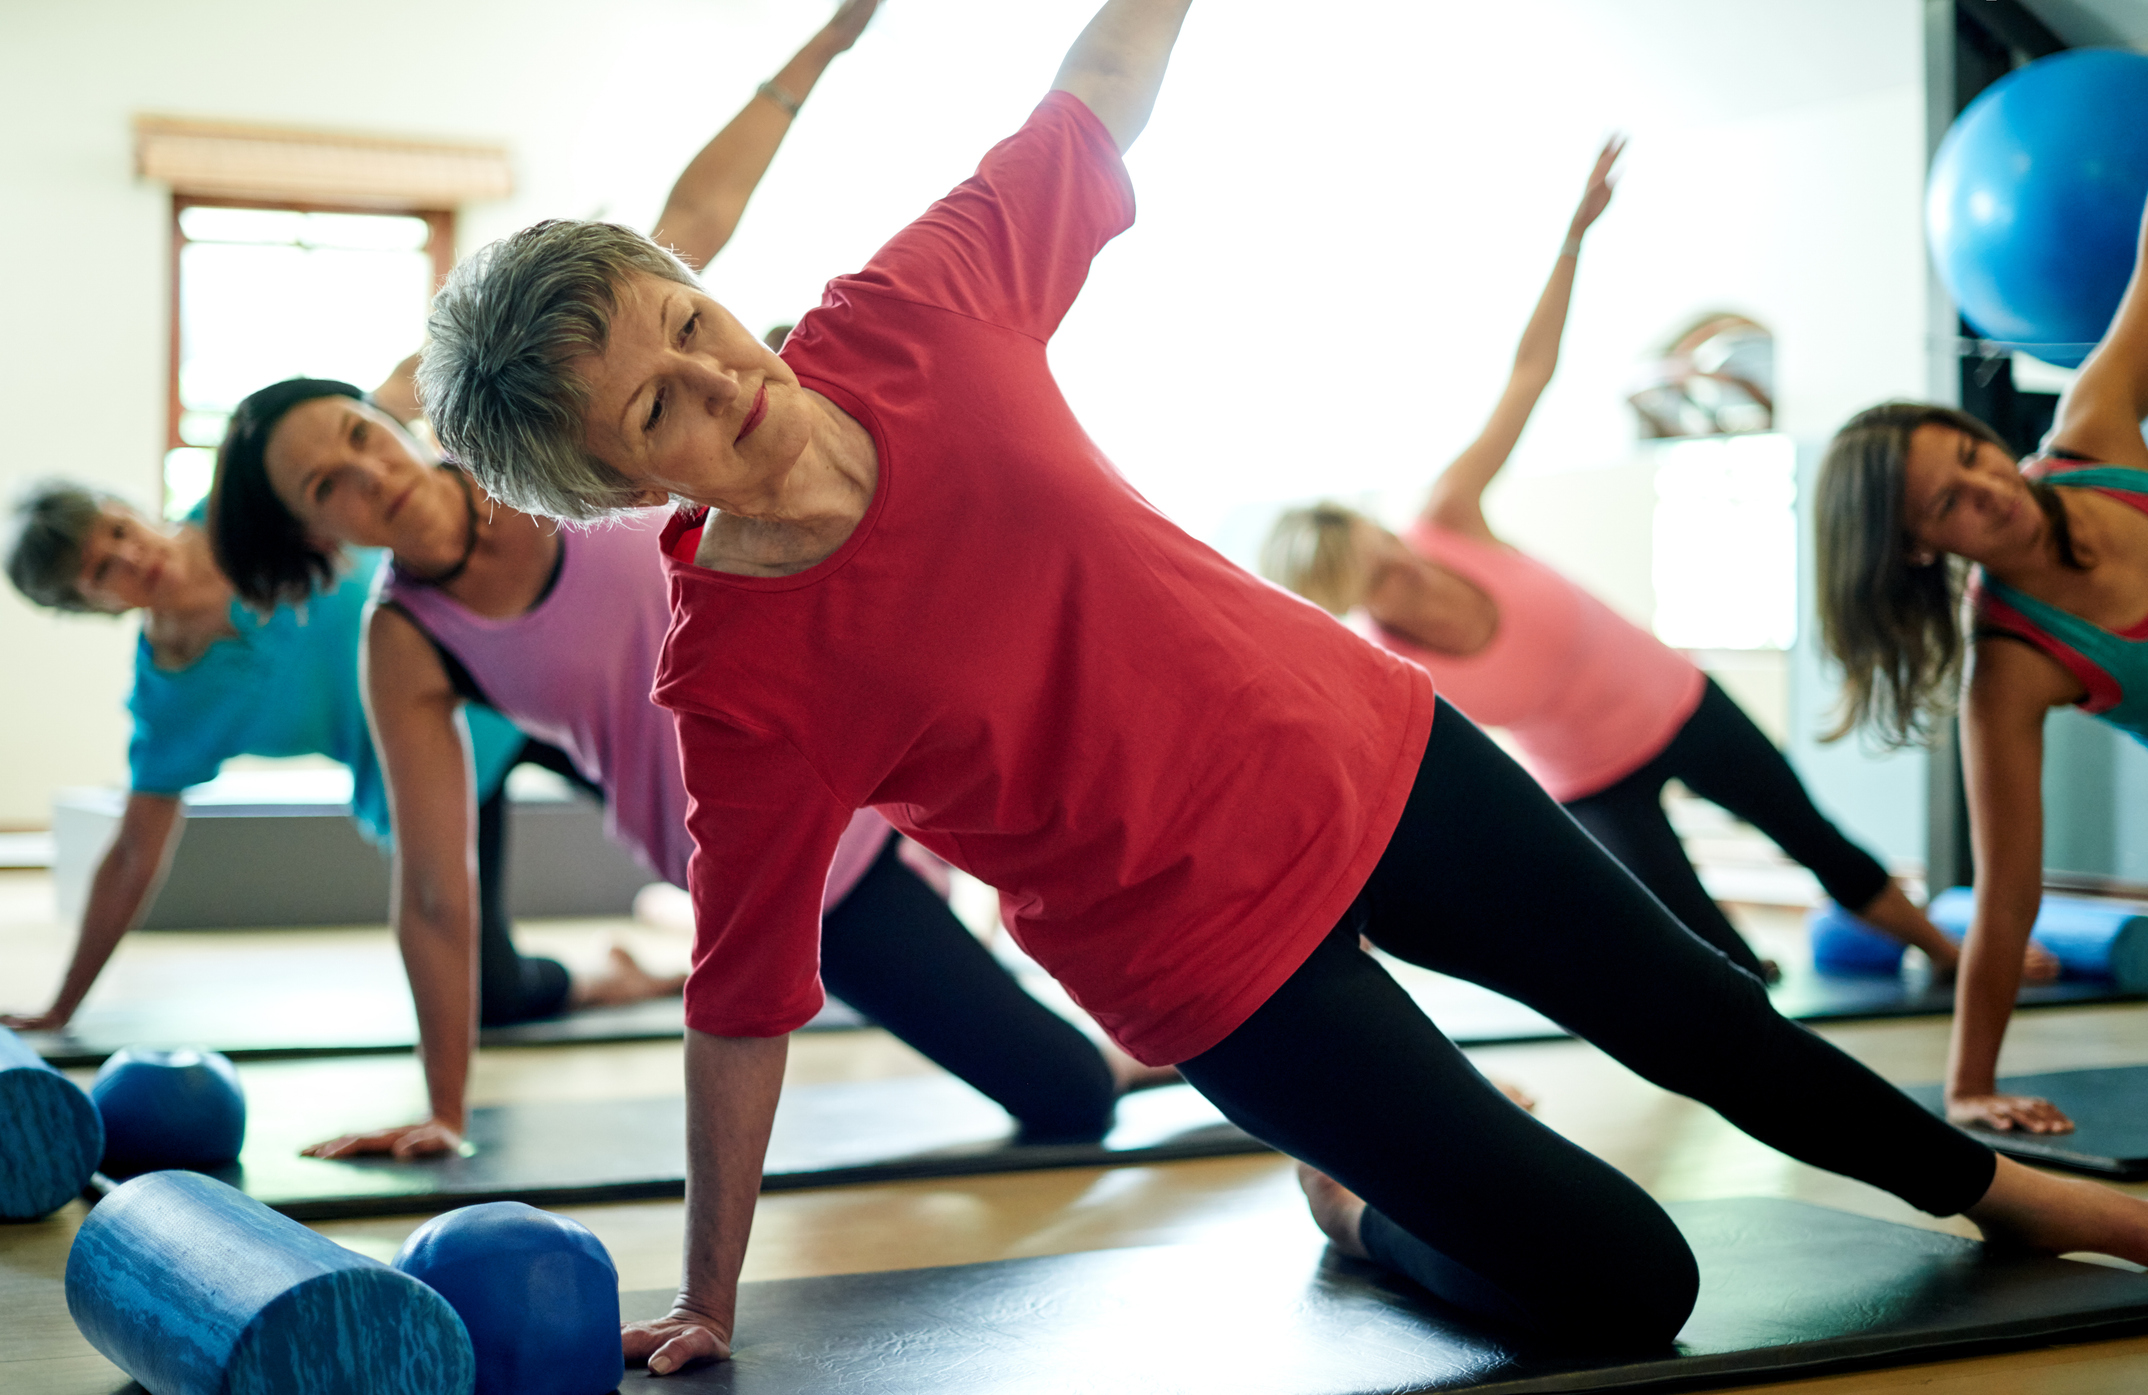 A senior participates in a pilates class that she takes regularly in retirement.